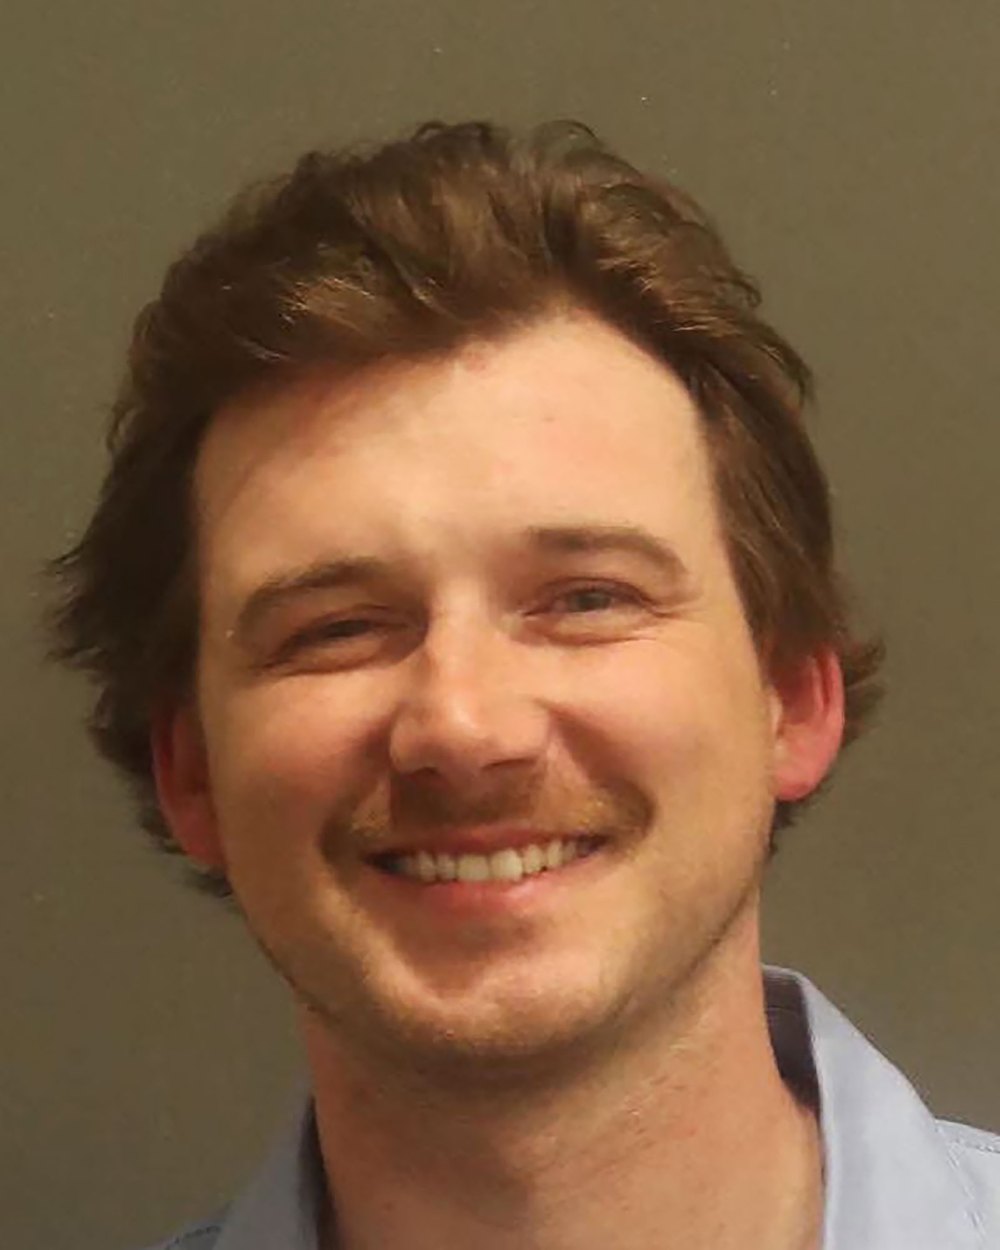 Morgan Wallen Spotted With Mystery Woman Moments Before Nashville Arrest Mugshot